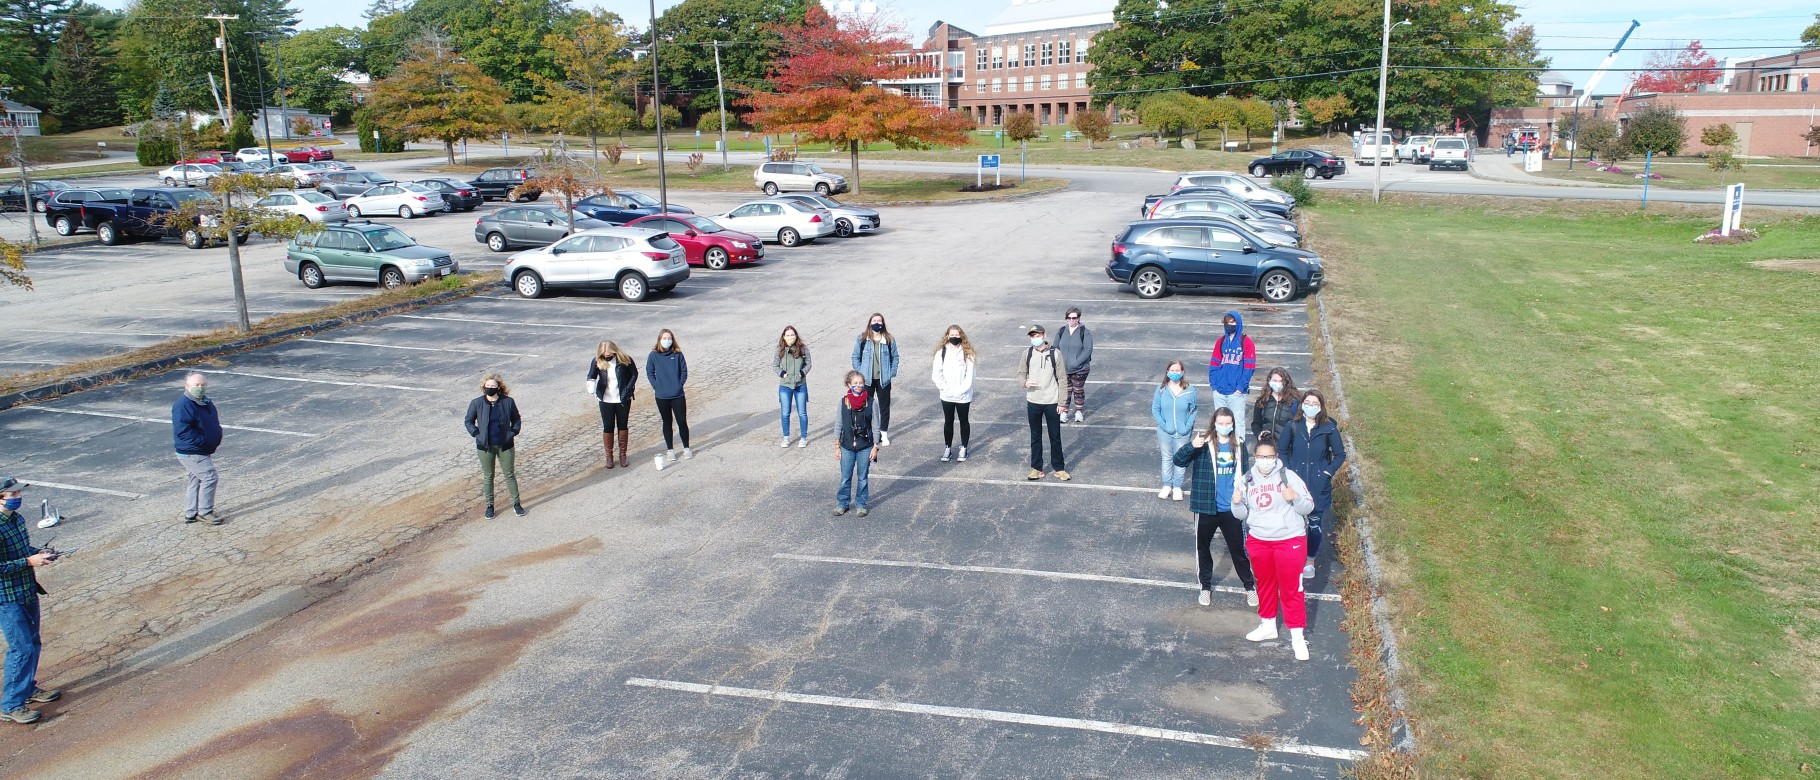 GIS students taken from a drone during GIS Day activities